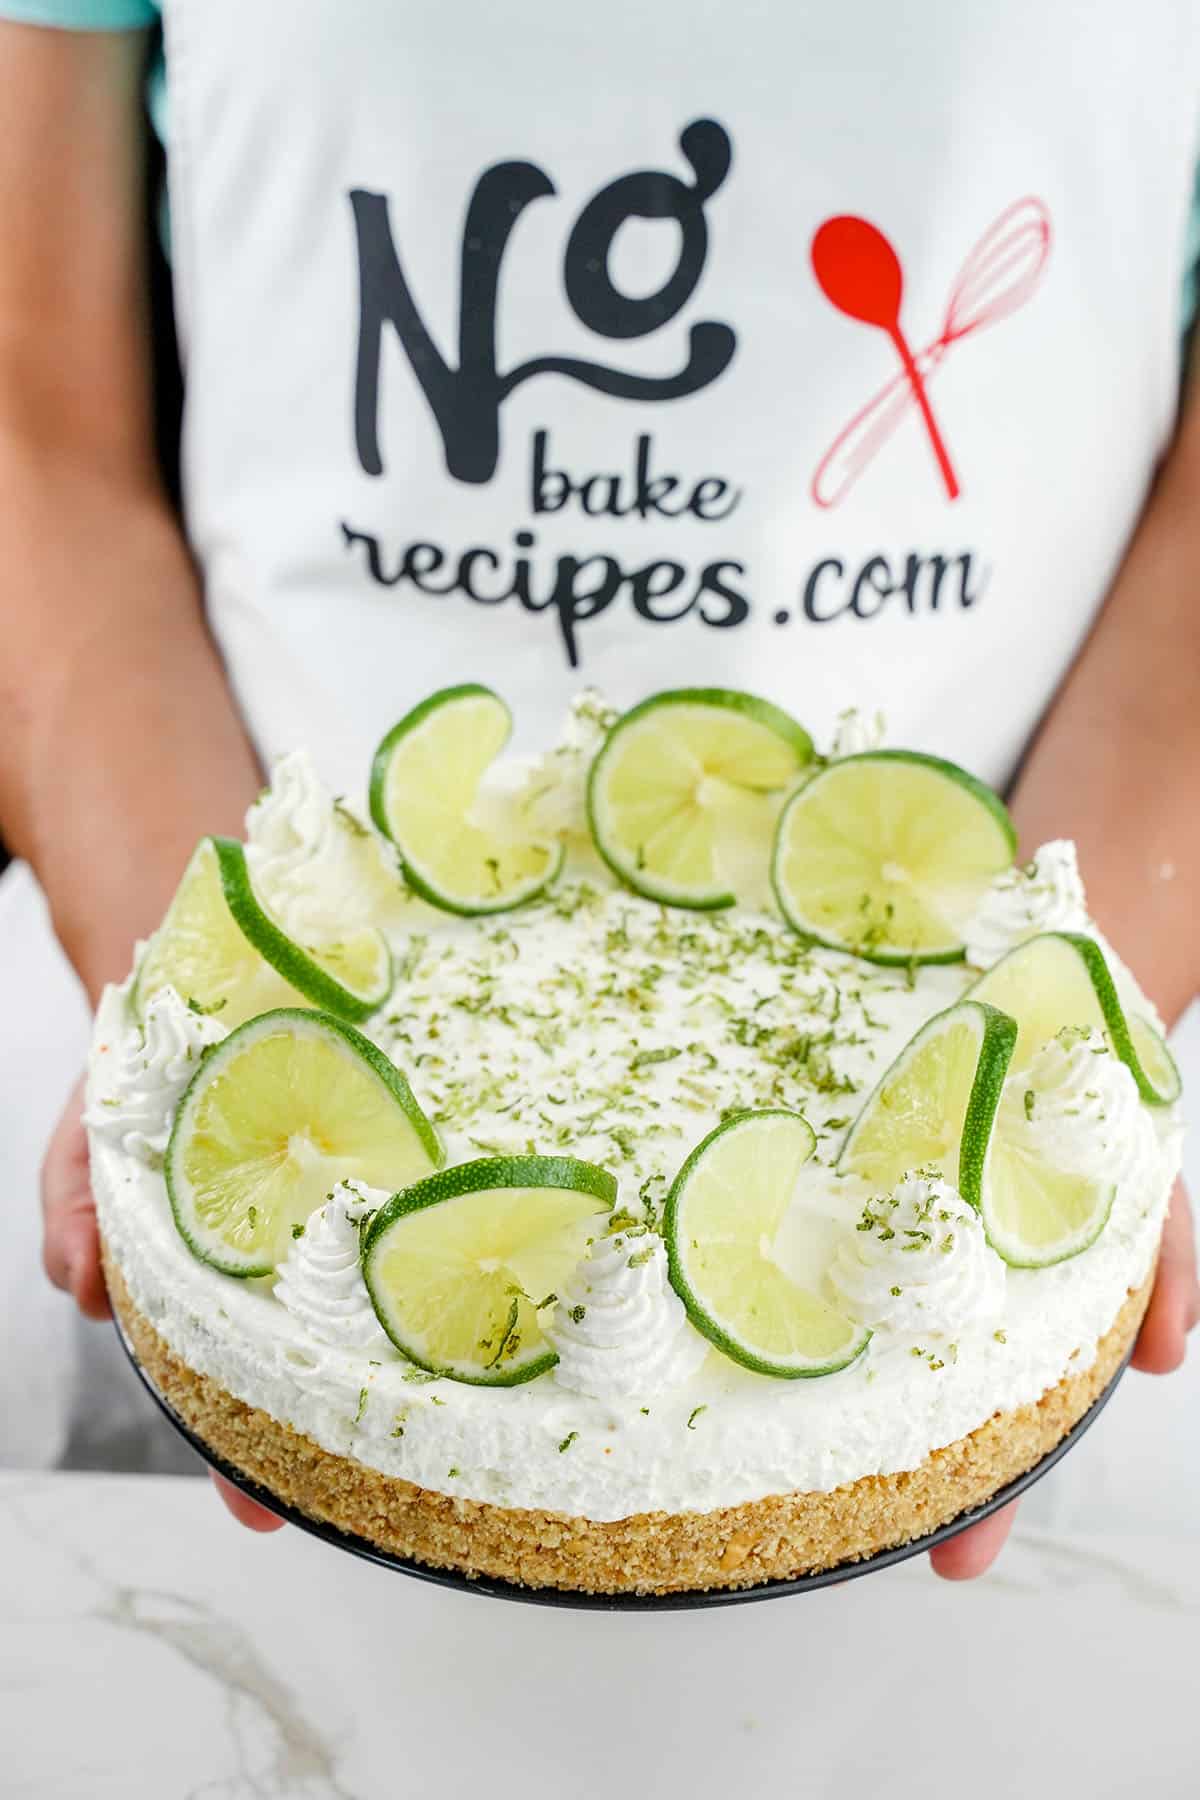 Beautifully Decorated with Lime and Whipped Rosettes upon this Key Lime Cheesecake.